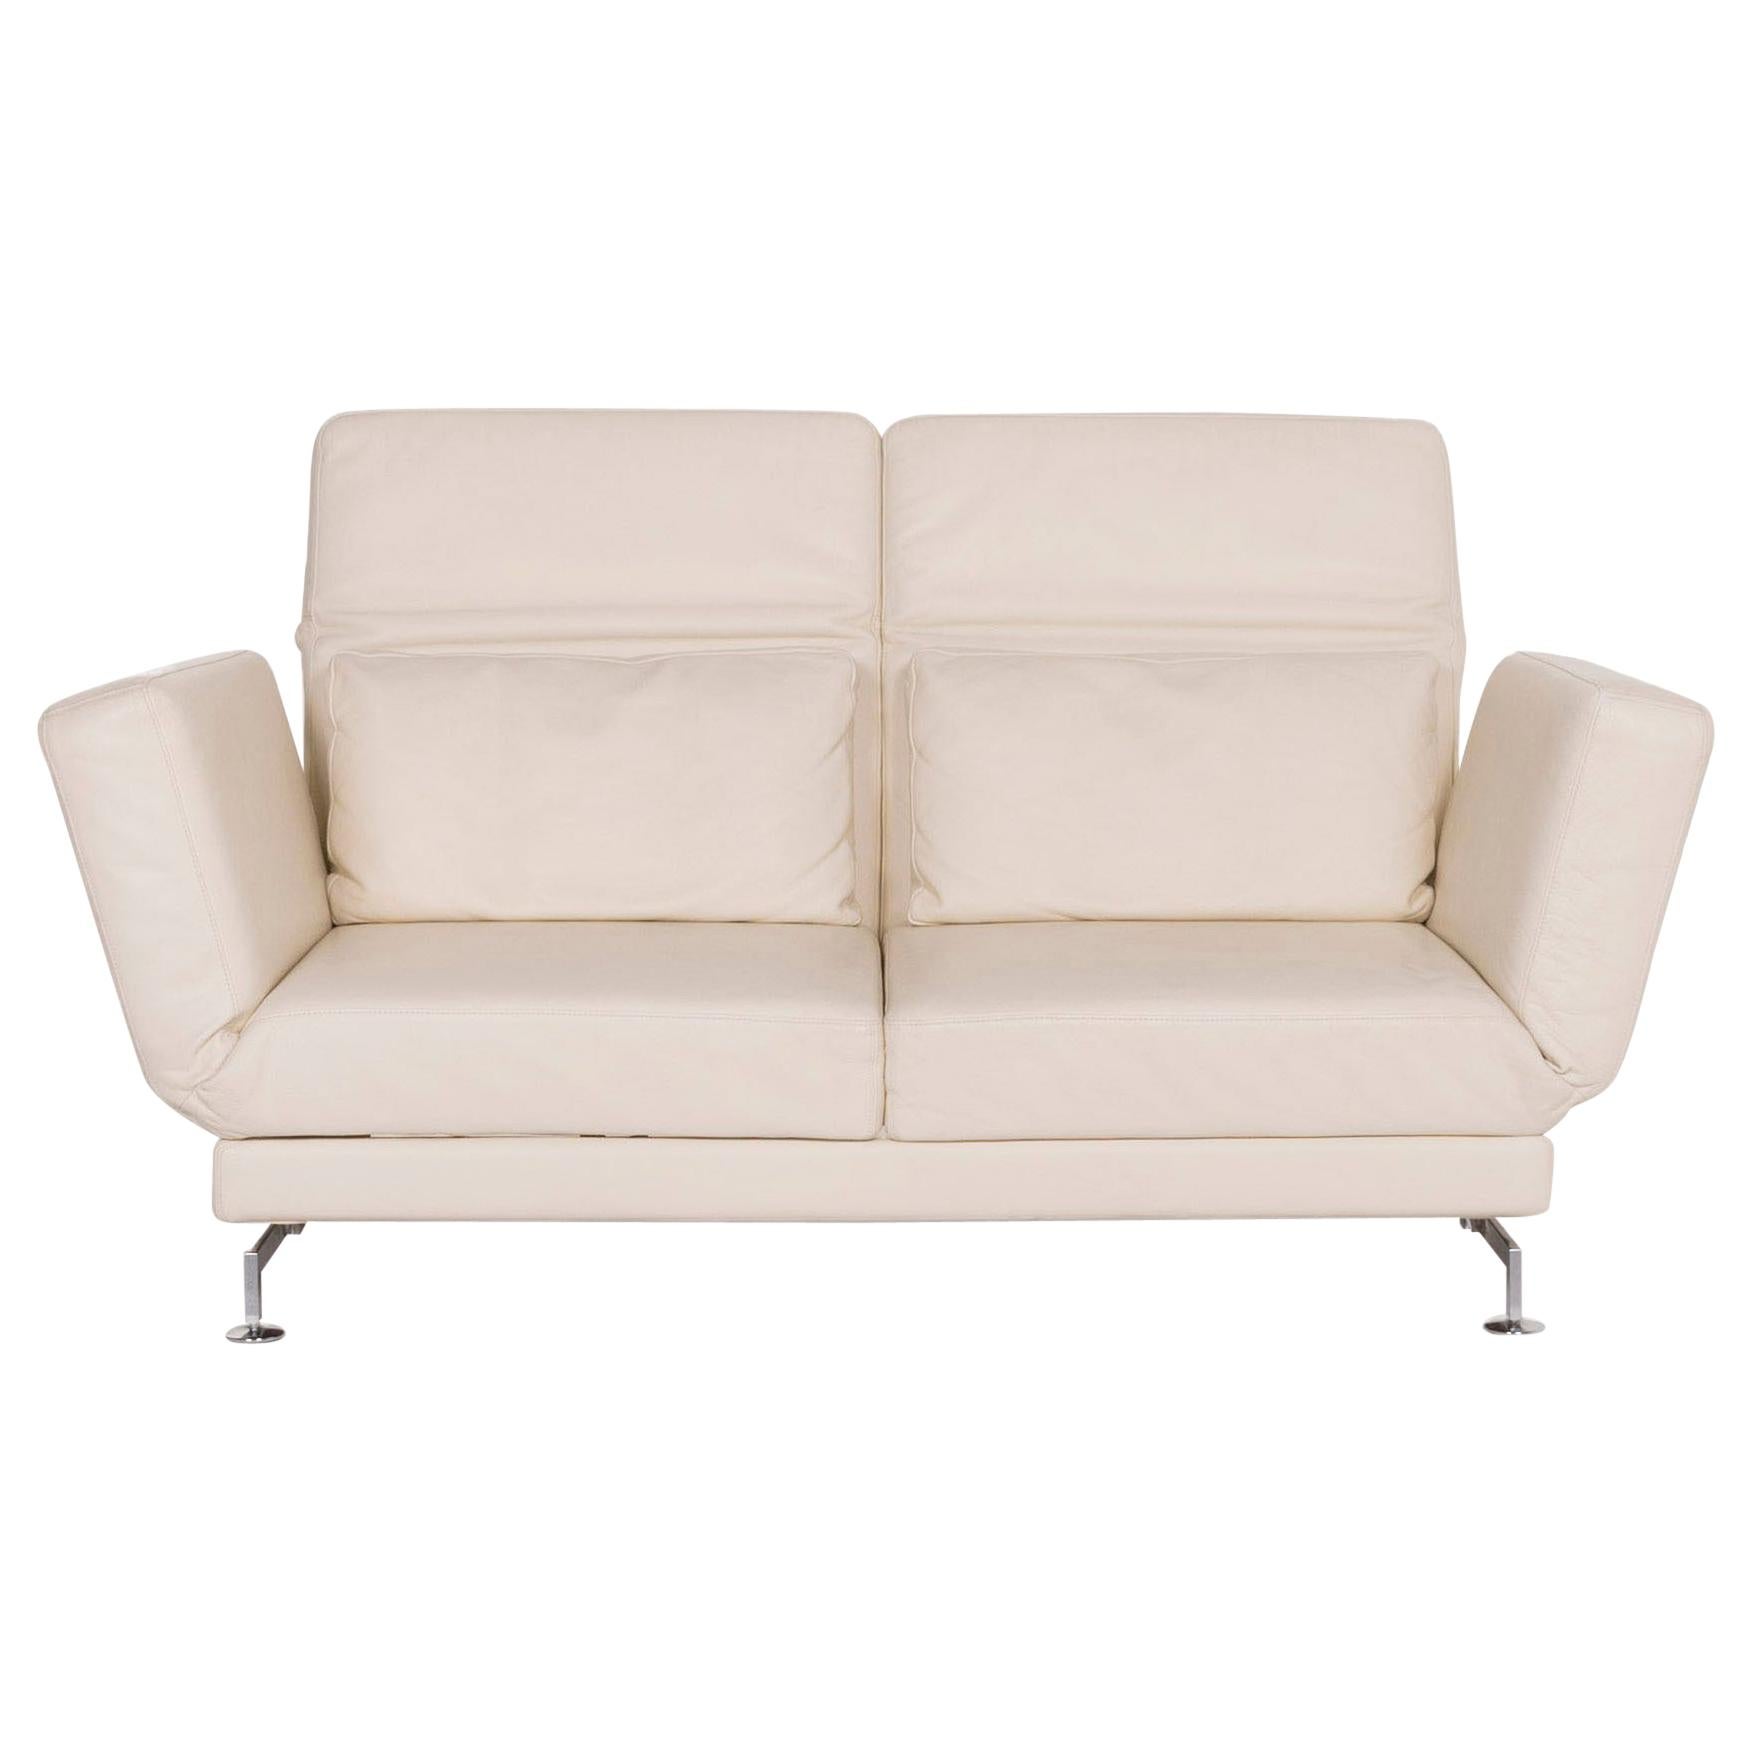 Brühl & Sippold Moule Leather Sofa Cream Two-Seat For Sale